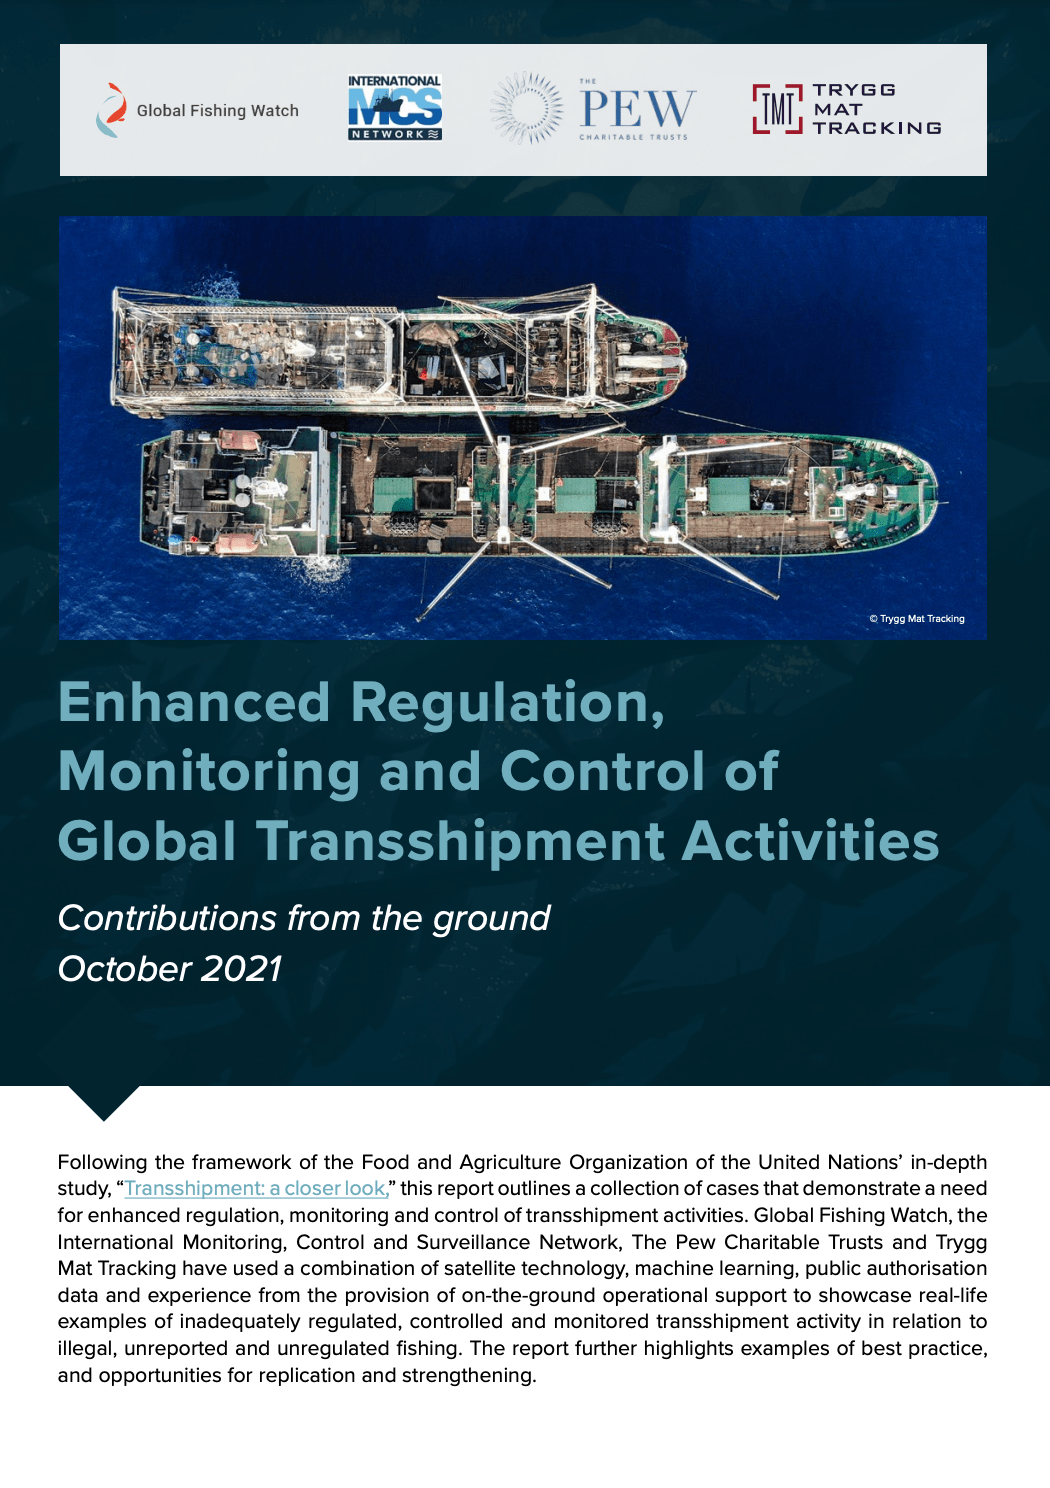 Enhanced Regulation, Monitoring and Control of Global Transshipment Activities